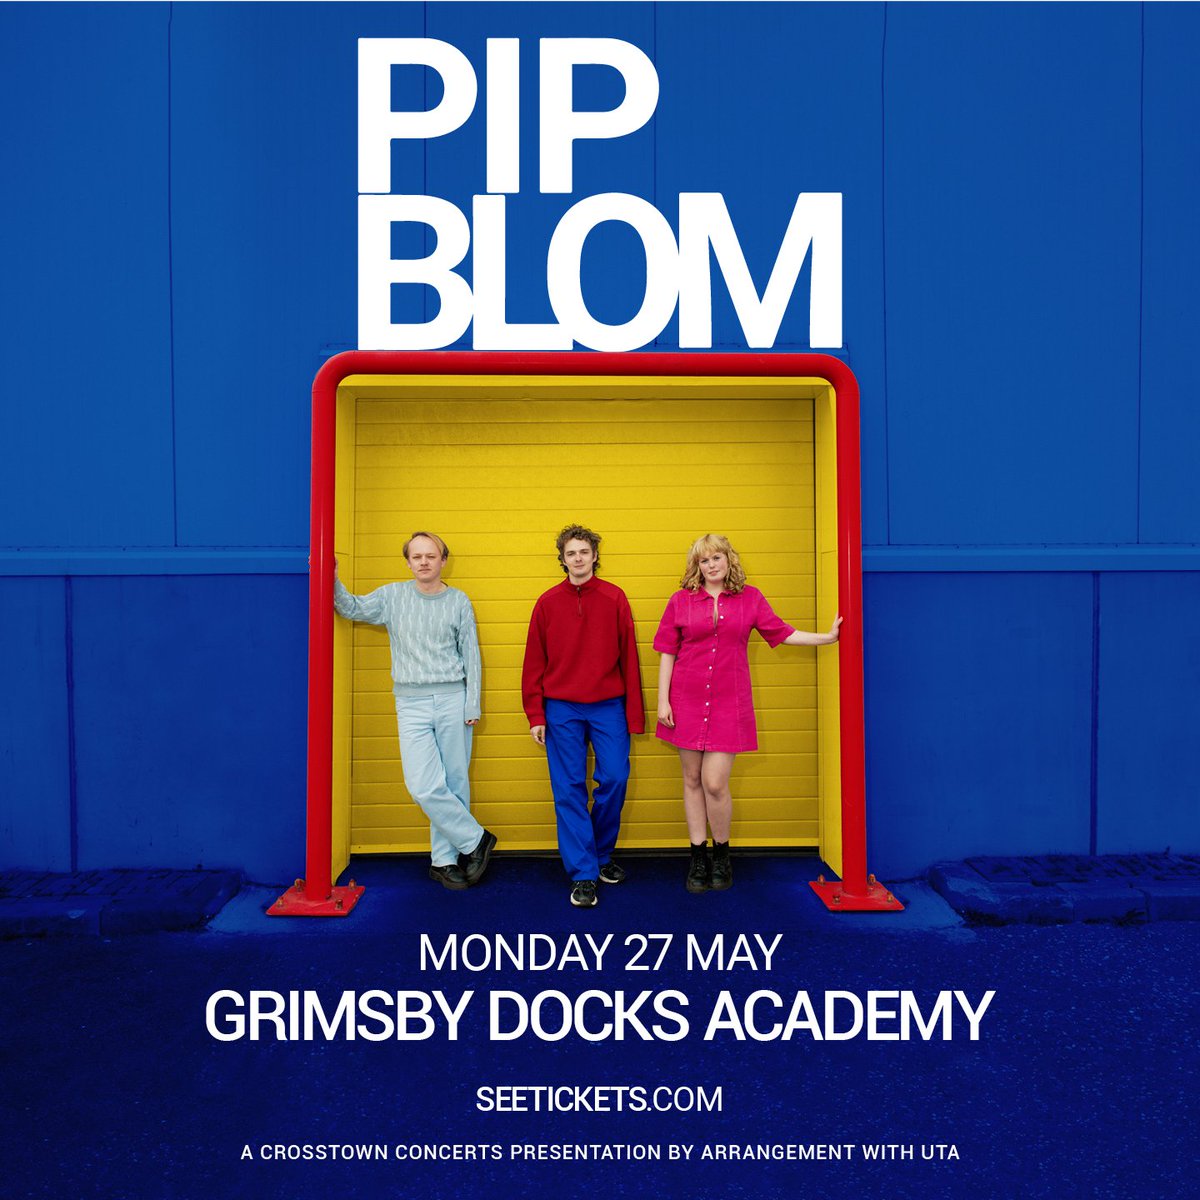 📣📣📣 Calling all lovers of great music!!! Lincolnshire is in for a treat when the mighty @Pipblom come to @DocksAcademy. Buy your tickets tell your friends. You can probably guess that I love this band...and you'd be correct! They could become your new favourite band too!!